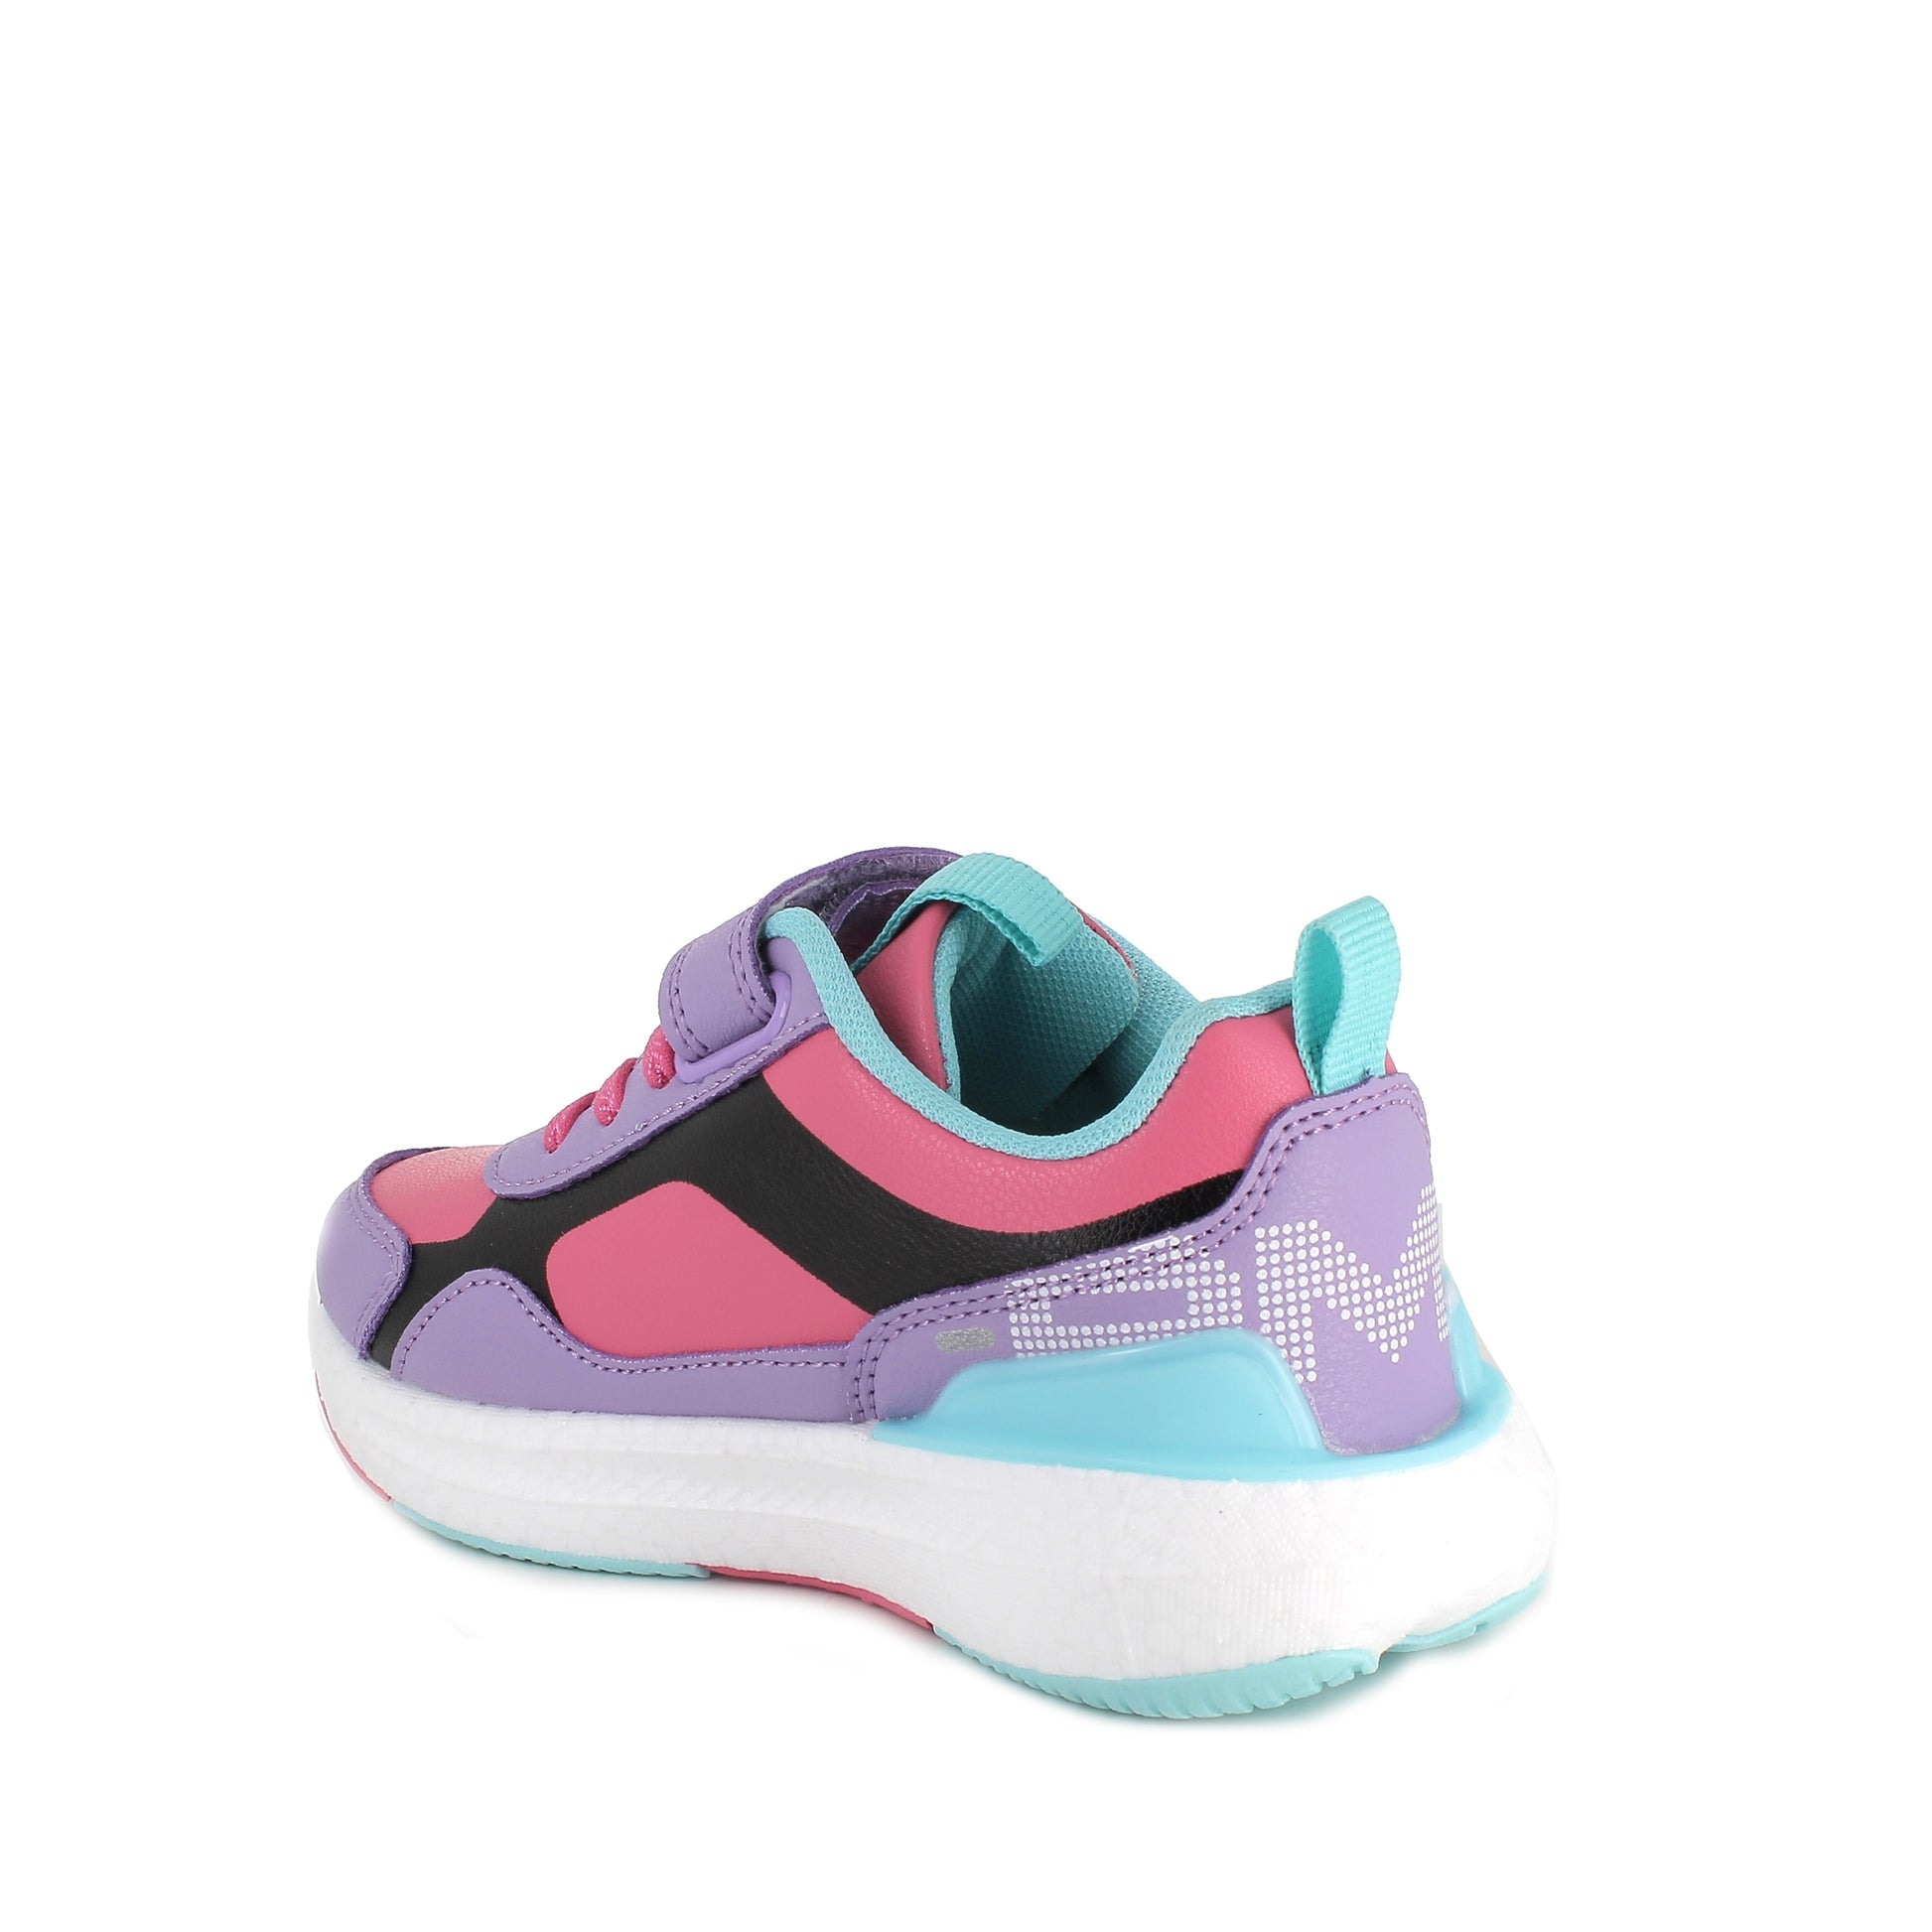 A girls casual trainer by Primigi, style 4962500 B&G Rapid, in purple and pink multi with faux lace and velcro fastening. Angled inner side view.